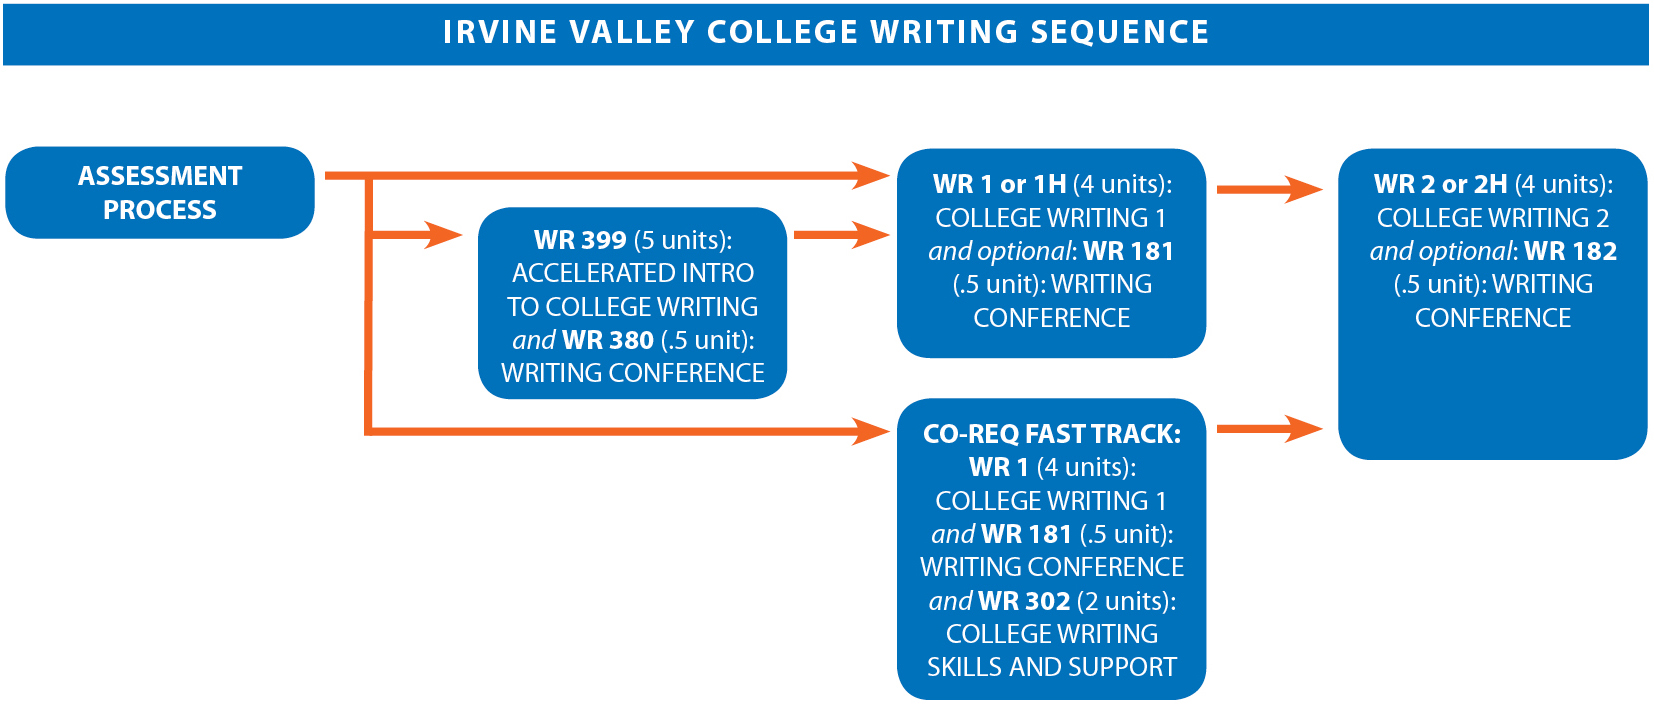 Graphical chart showing the writing course sequence. The chart shows the following: Depending on their assessment result from the assessment process, students are placed into one of three tracks. The first track begins with WR 399, 5 units, Accelerated Intro to College Writing, and WR 380, .5 unit, Writing Conference. From there, students will take WR 1 or 1H, 4 units, College Writing 1, and the optional WR 181, .5 unit, Writing Conference, and then WR 2 or 2H, 4 units, College Writing 2, and the optional WR 182, .5 unit, Writing Conference. In the second track, students will place directly into WR 1 or 1H, 4 units, College Writing 1, and the optional WR 181, .5 unit, Writing Conference, and then will take WR 2 or 2H, 4 units, College Writing 2, and the optional WR 182, .5 unit, Writing Conference. In the third option, the Co-Req Fast Track, students will take three classes: WR 1, 4 units, College Writing 1, and WR 181, .5 unit, Writing Conference, and WR 302, 2 units, College Writing Skills and Support. Then they will take WR 2 or 2H, 4 units, College Writing 2, and the optional WR 182, .5 unit, Writing Conference.